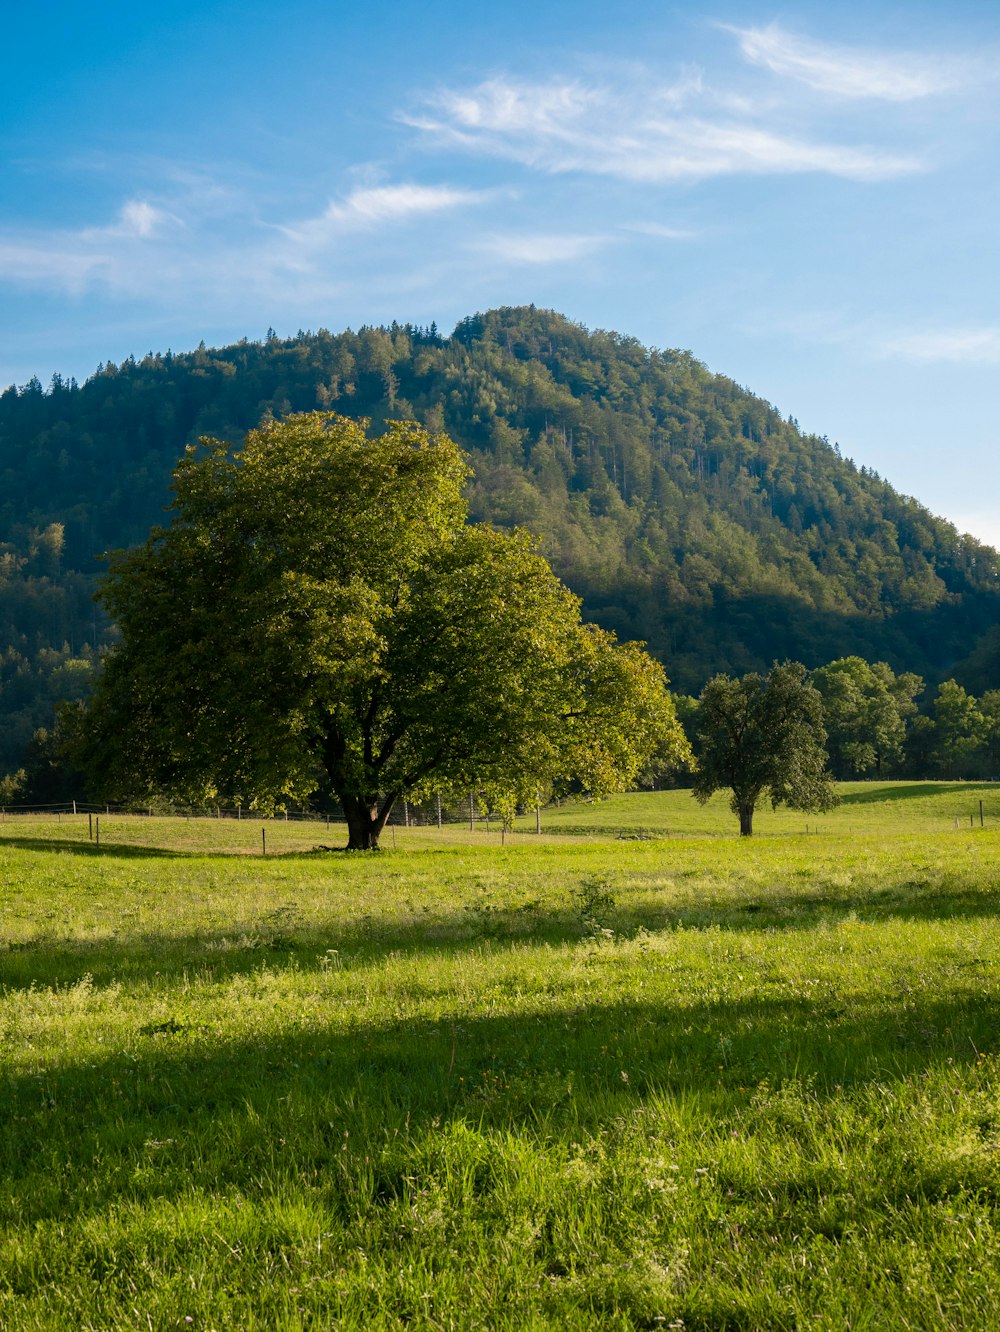 a grassy field with trees and a hill in the background